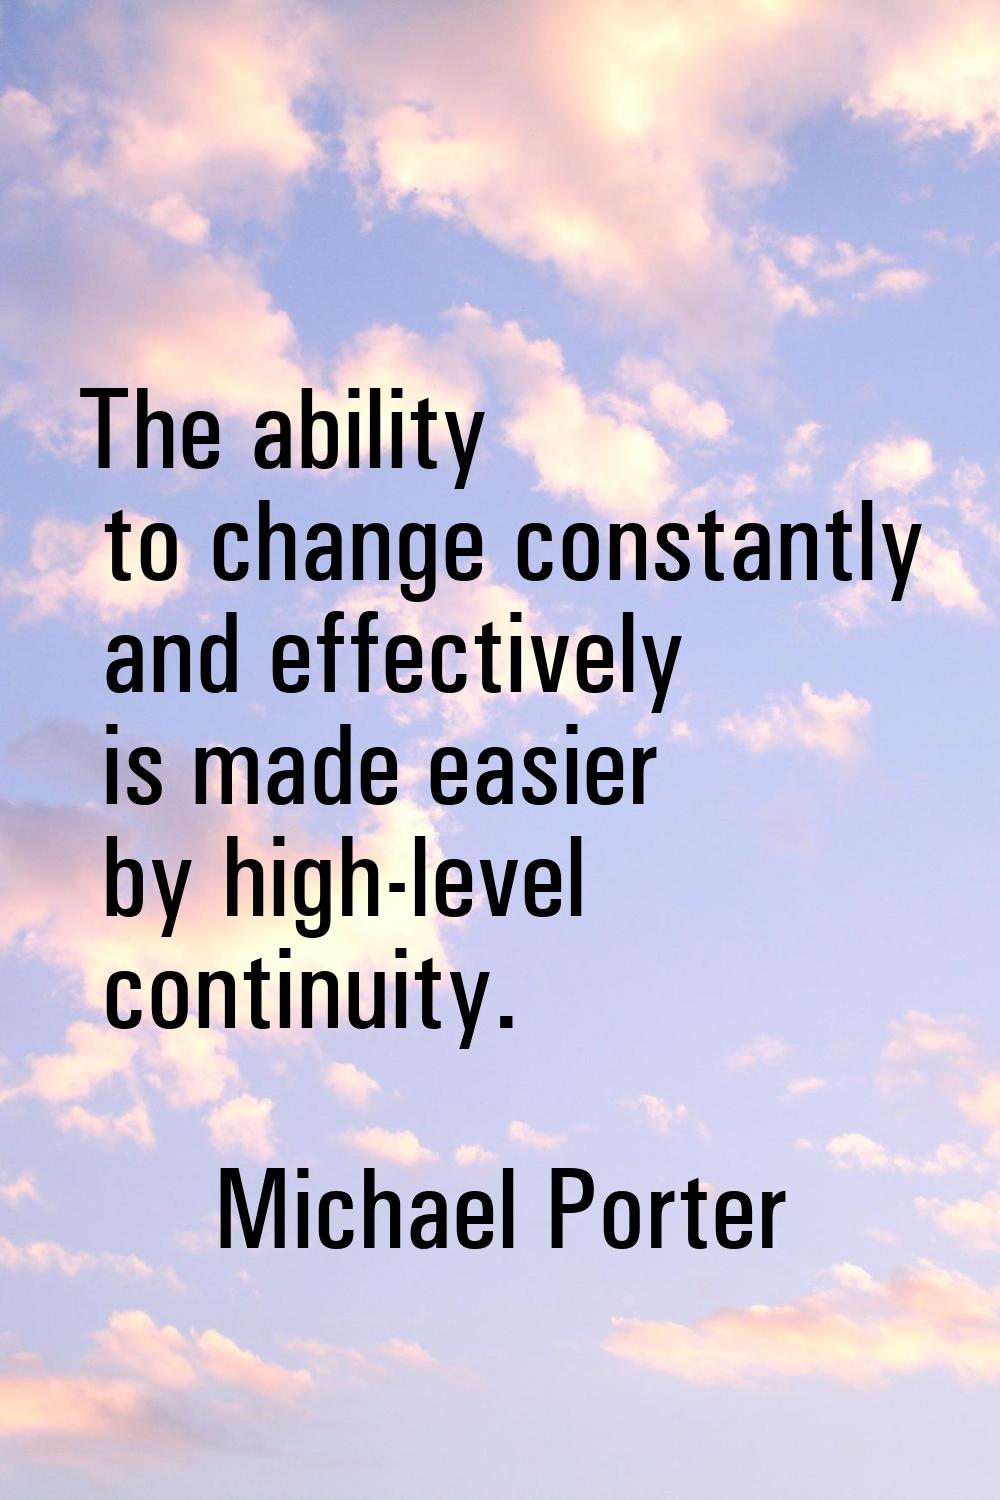 The ability to change constantly and effectively is made easier by high-level continuity.